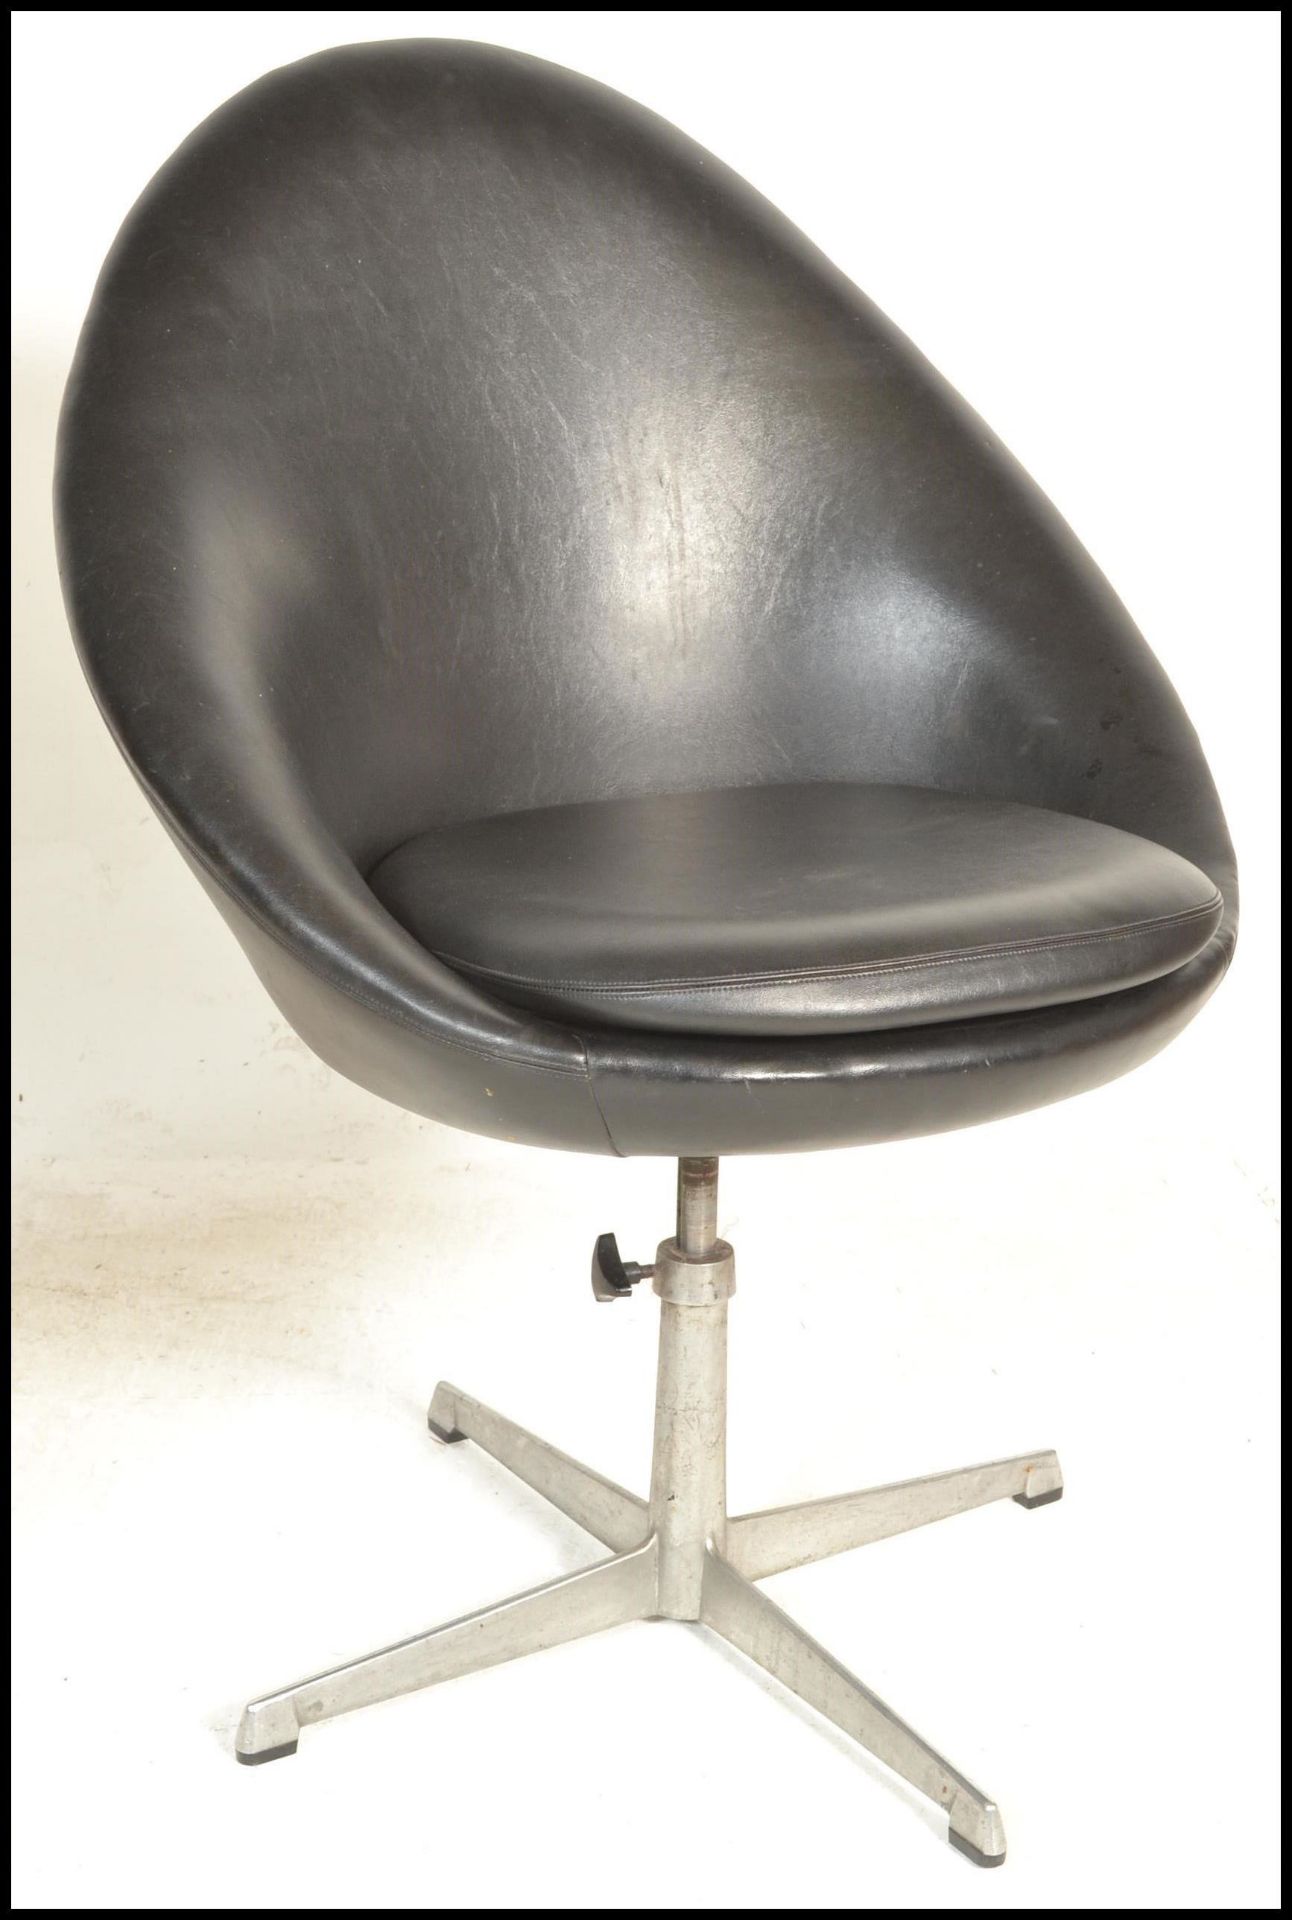 A pair of contemporary retro style swivel tub chairs, upholstered in a black leatherette material - Image 4 of 4